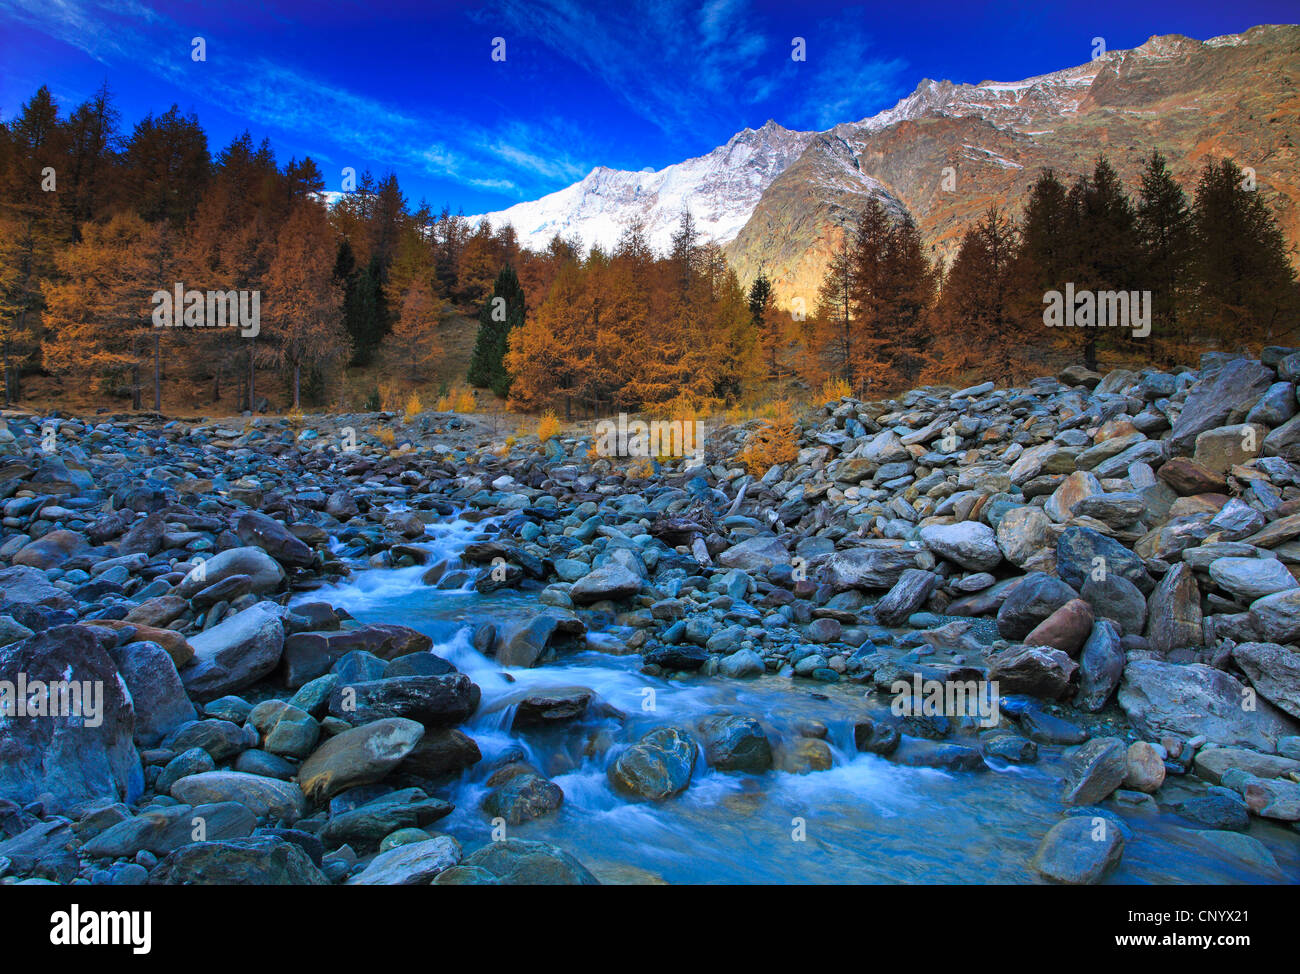 common larch, European larch (Larix decidua, Larix europaea), view through the Saas Valley with mountain brook and larch mountains in autumn colouration in front of snow-covered Mountain range, Switzerland, Valais, Saas Fee Stock Photo